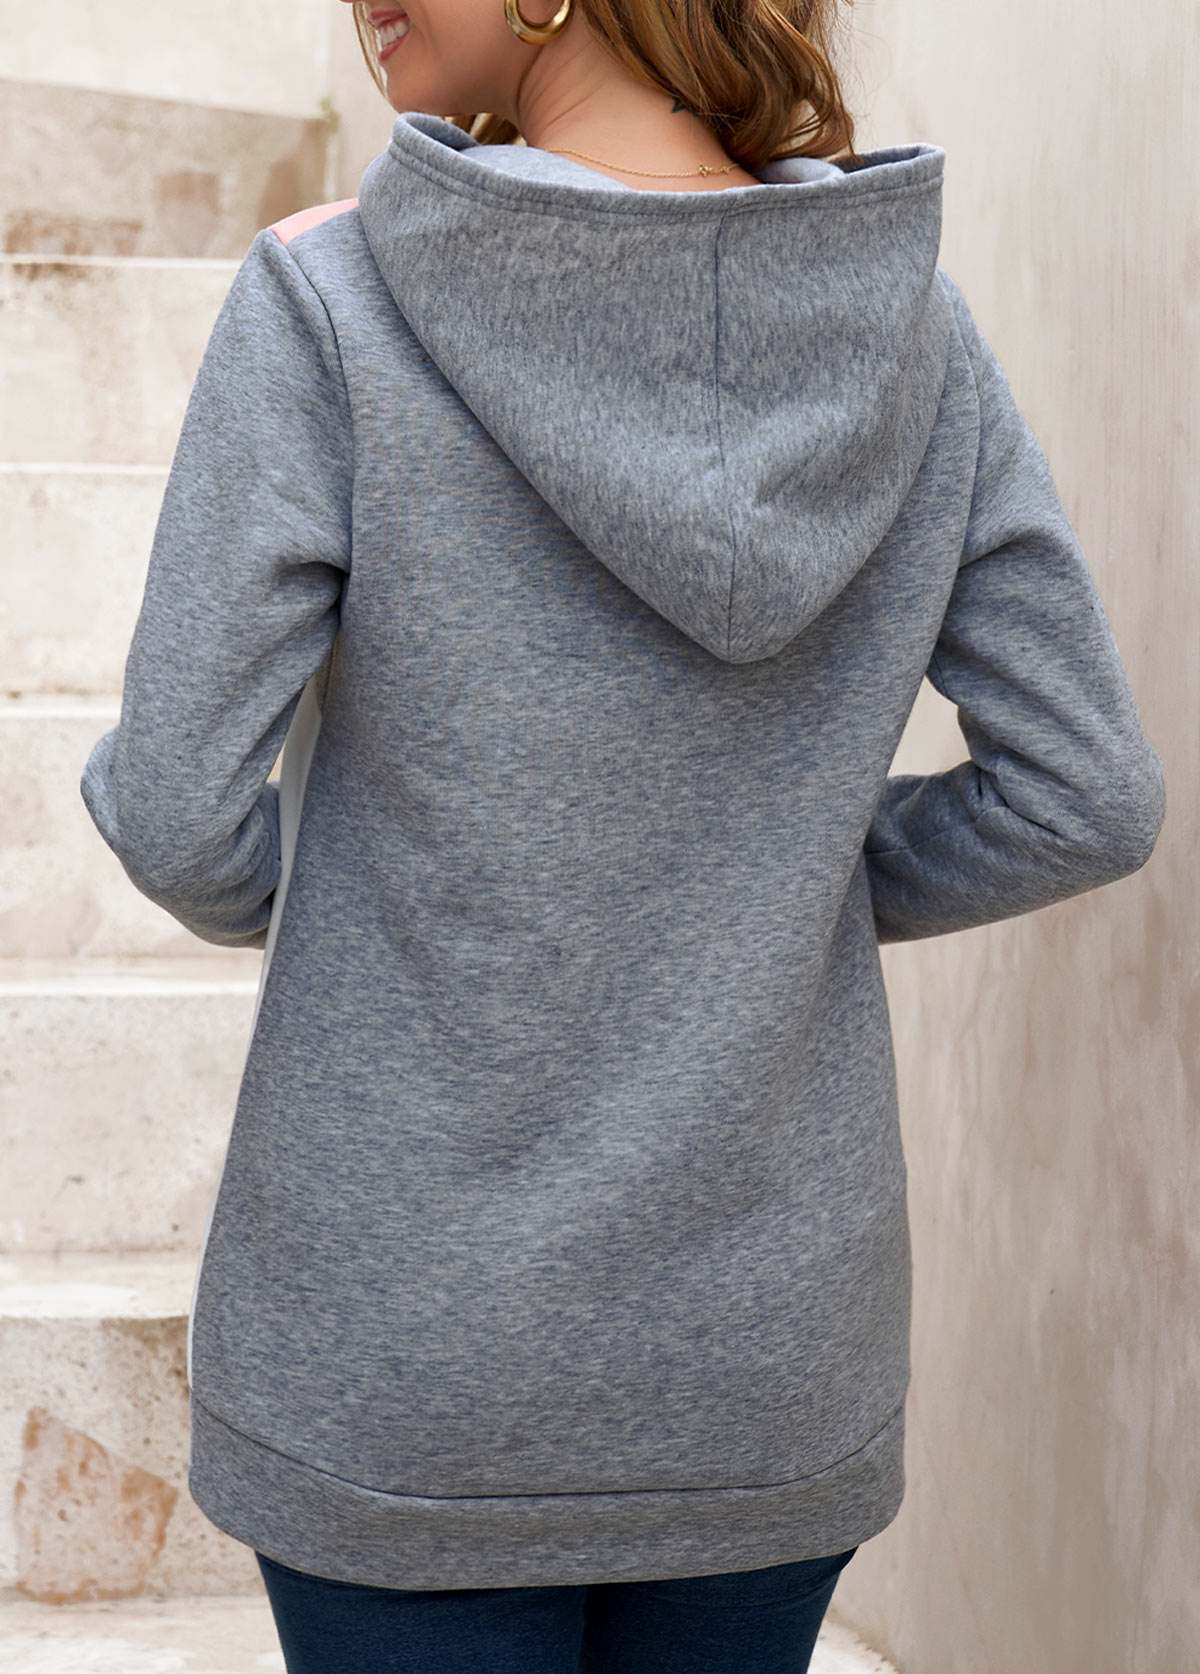 Decorative Button Contrast Long Sleeve Grey Hoodie